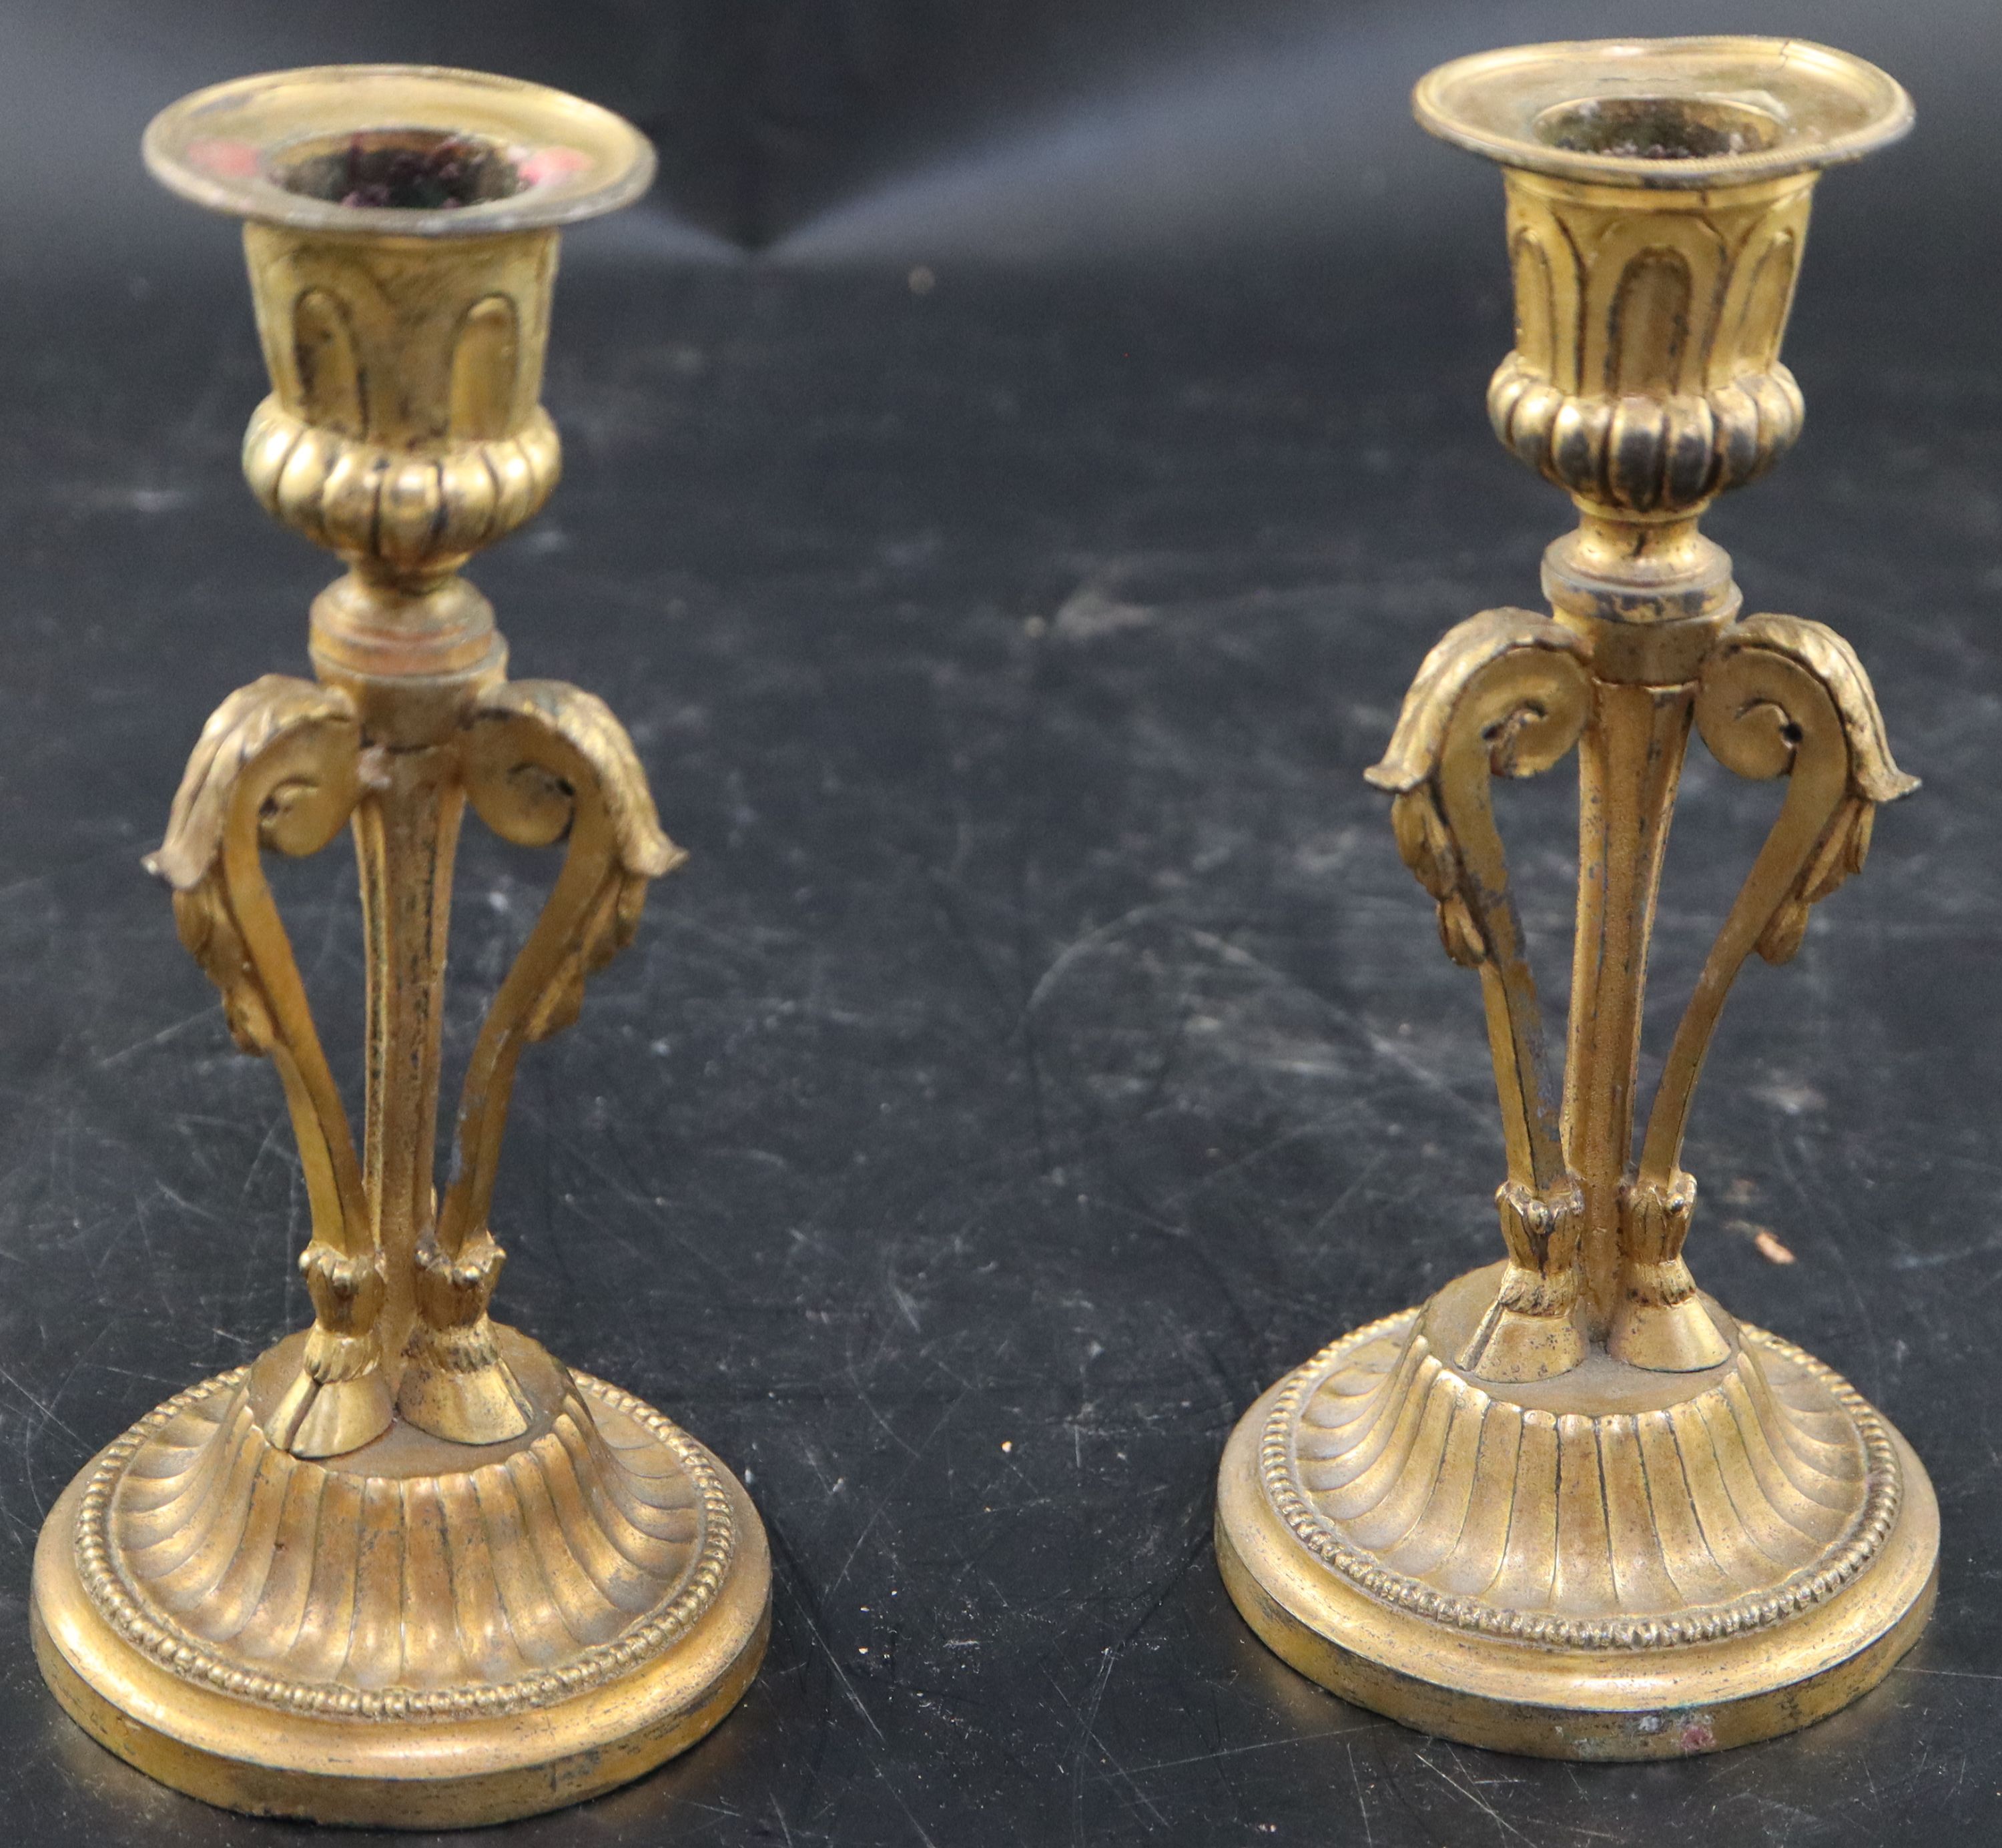 A pair of 19th century French ormolu candlesticks, height 17cm